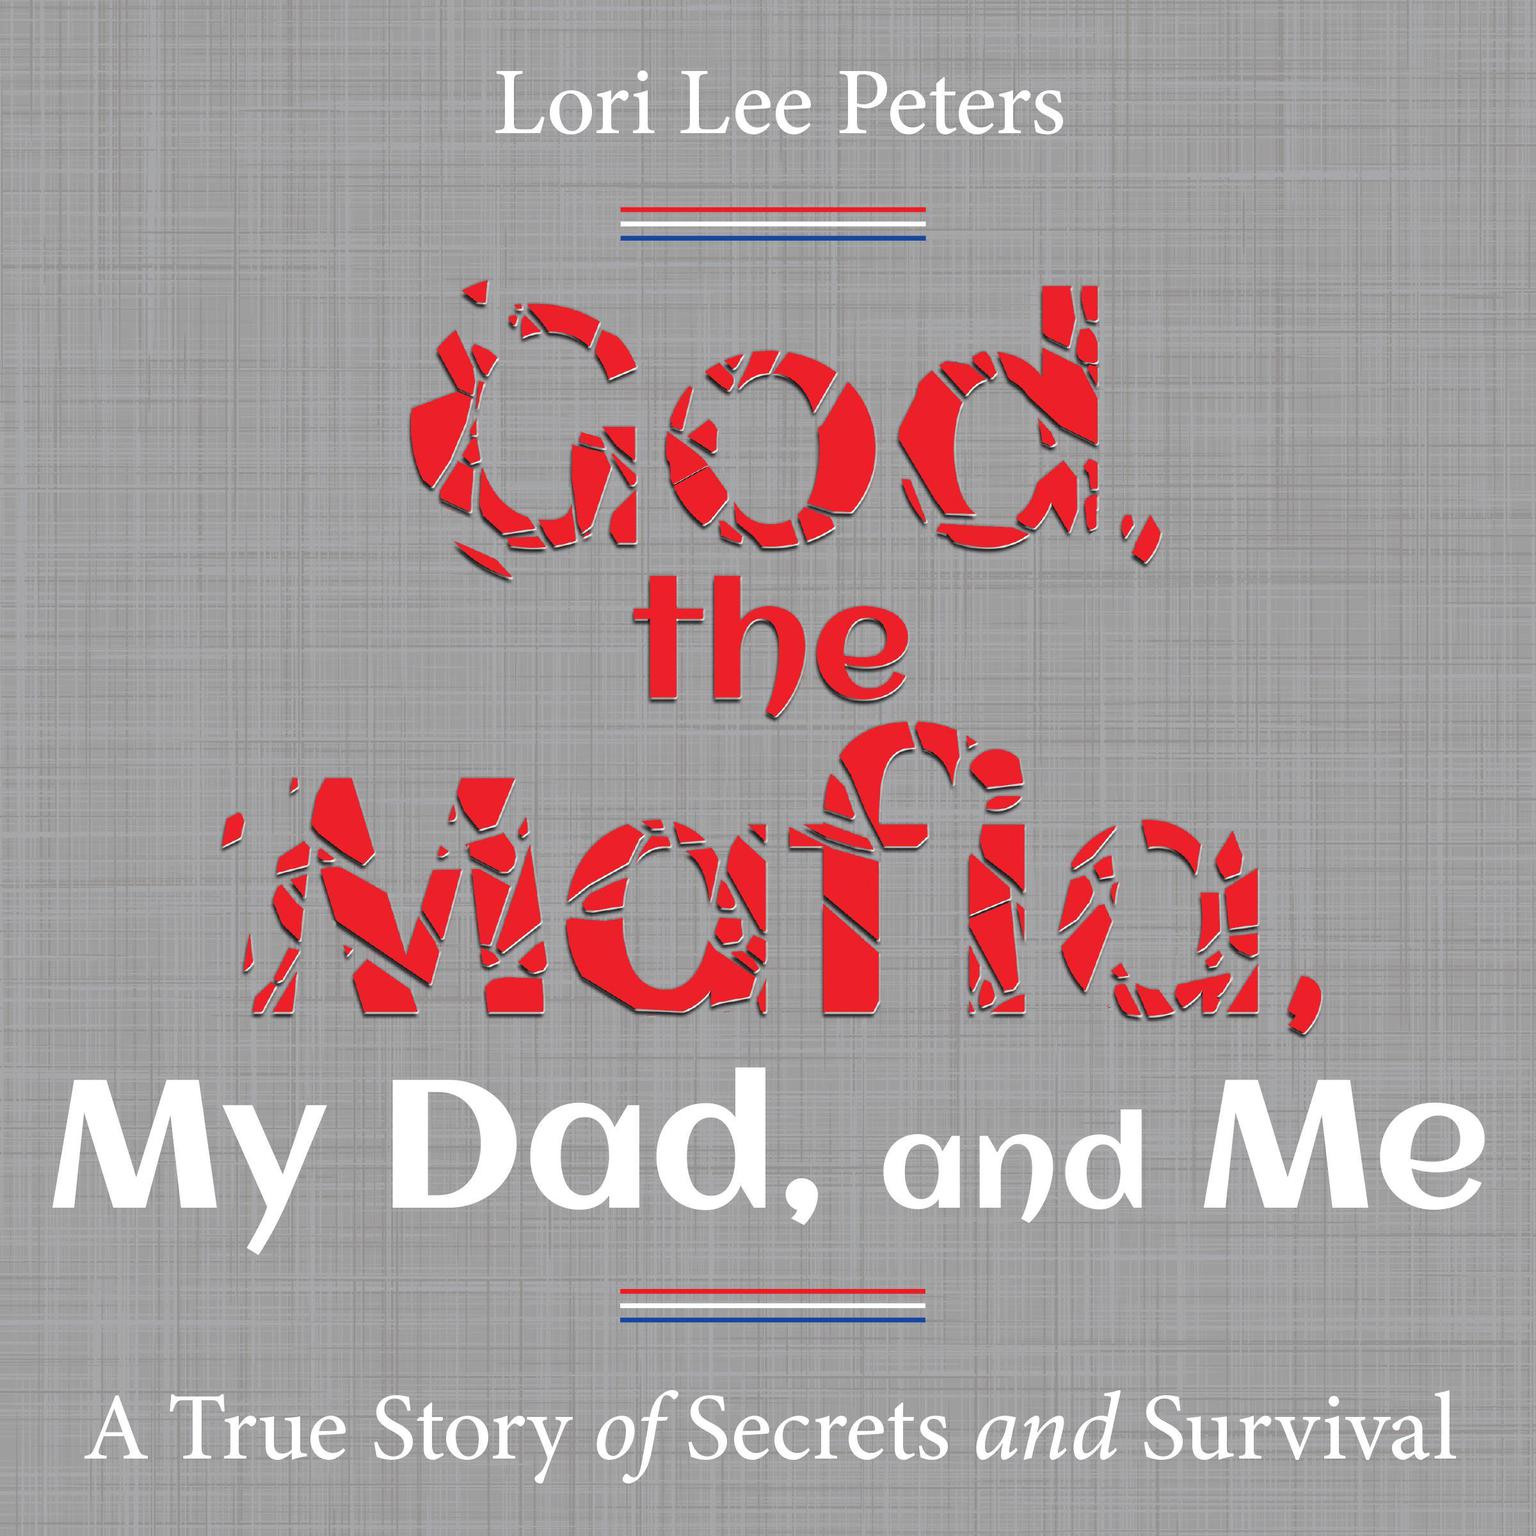 God, the Mafia, My Dad, and Me: A True Story of Secrets and Survival Audiobook, by Lori Lee Peters